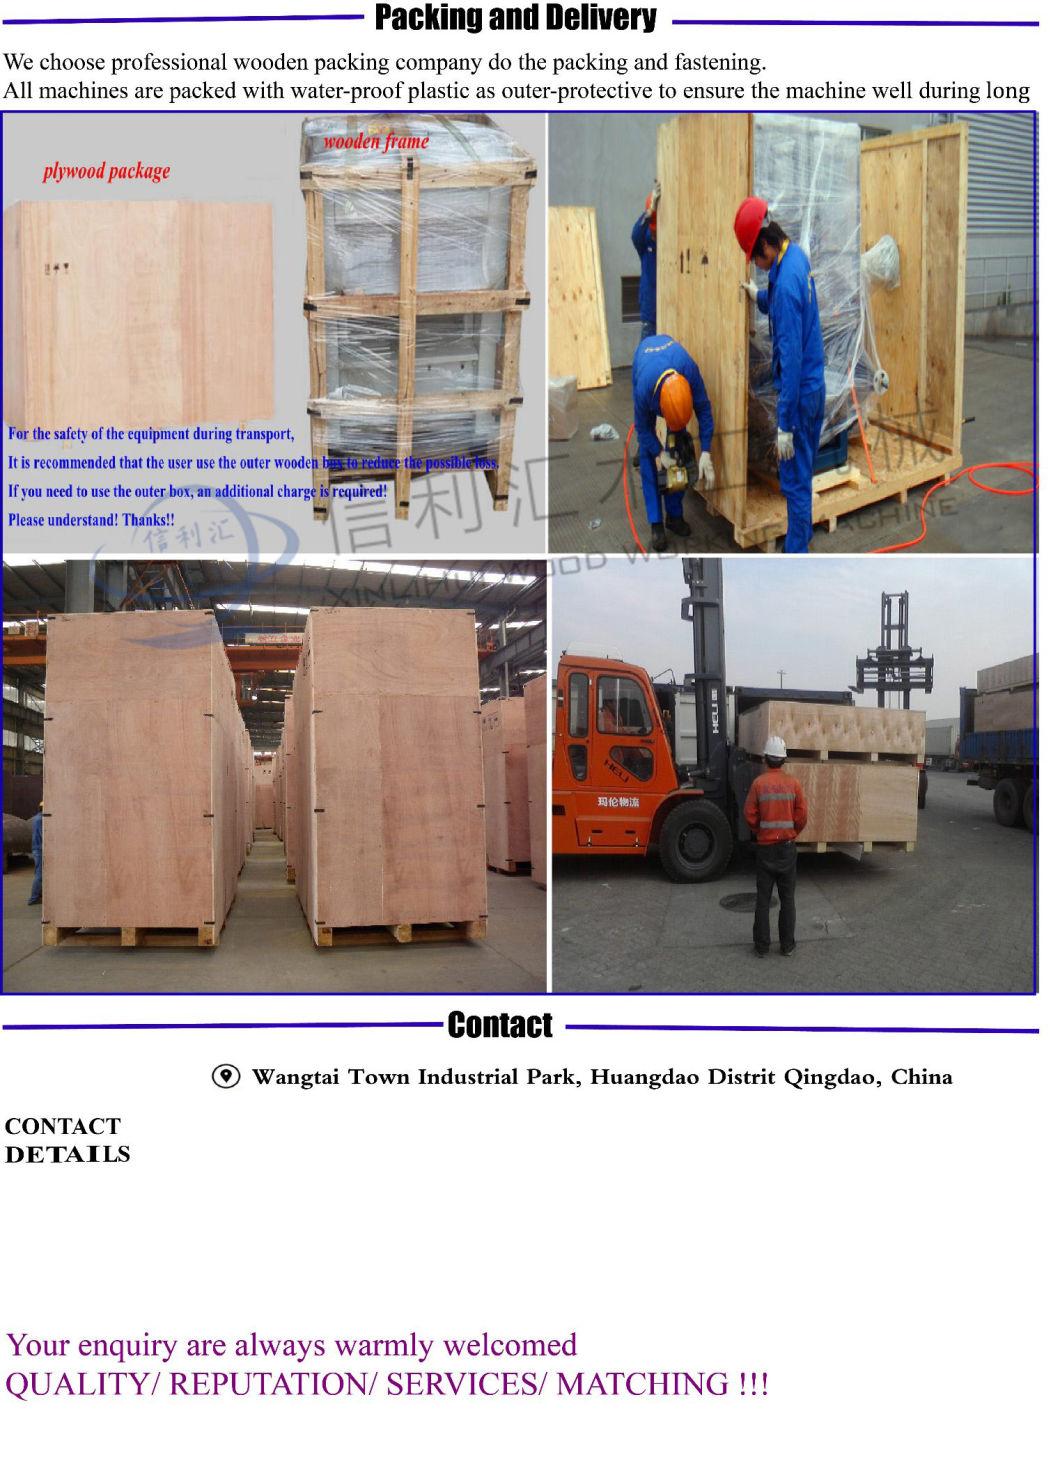 Six Sides Multi Axile CNC Wooden Panel Drilling Machine for Cabinets Works for All Holes on Panel Upper and Bottom Sides and 4 Sides at One Time 